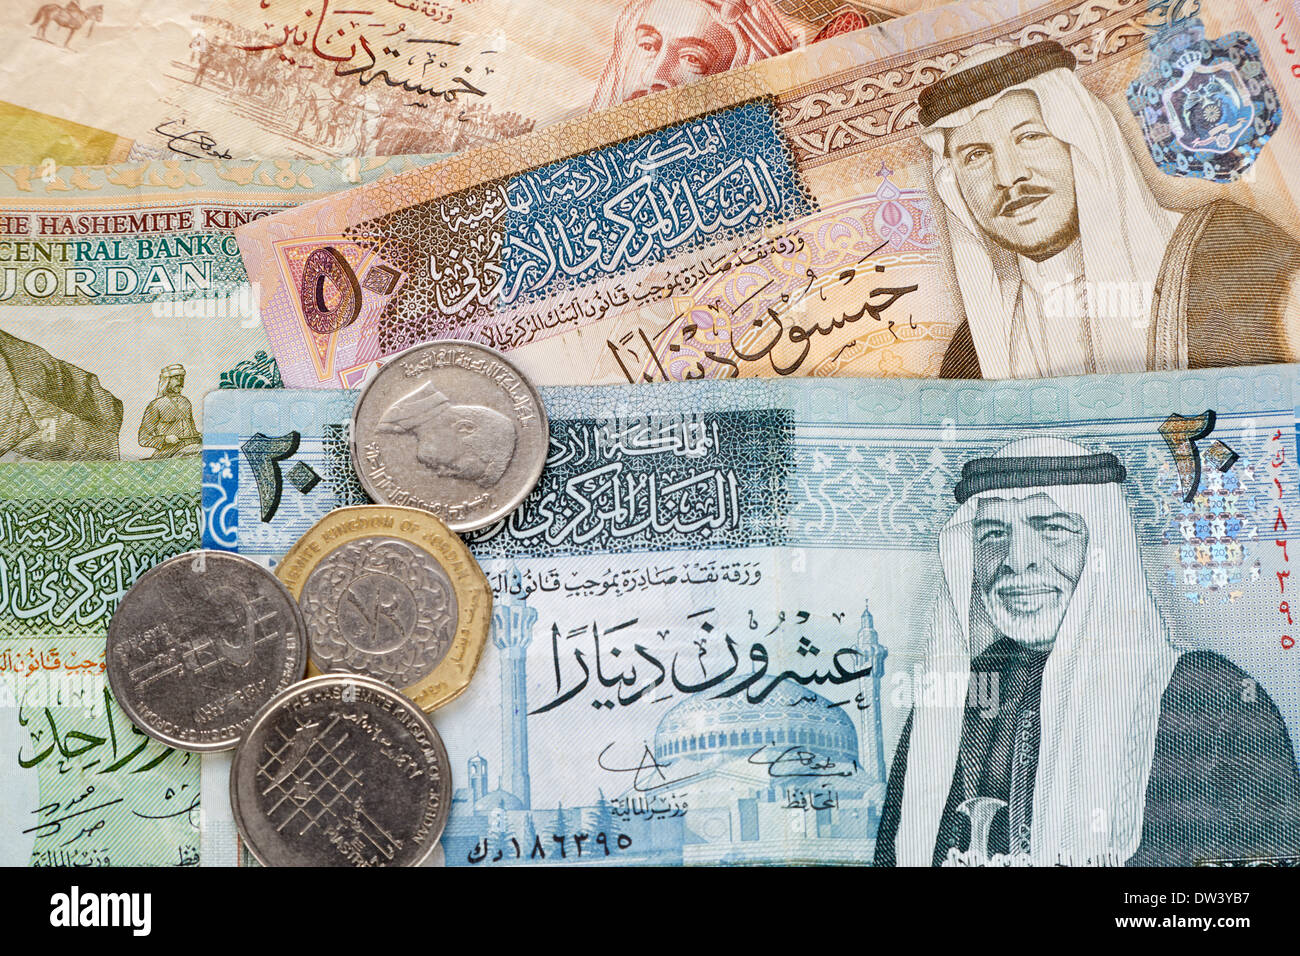 3 Jordan Currency High Resolution Stock Photography Images - Alamy